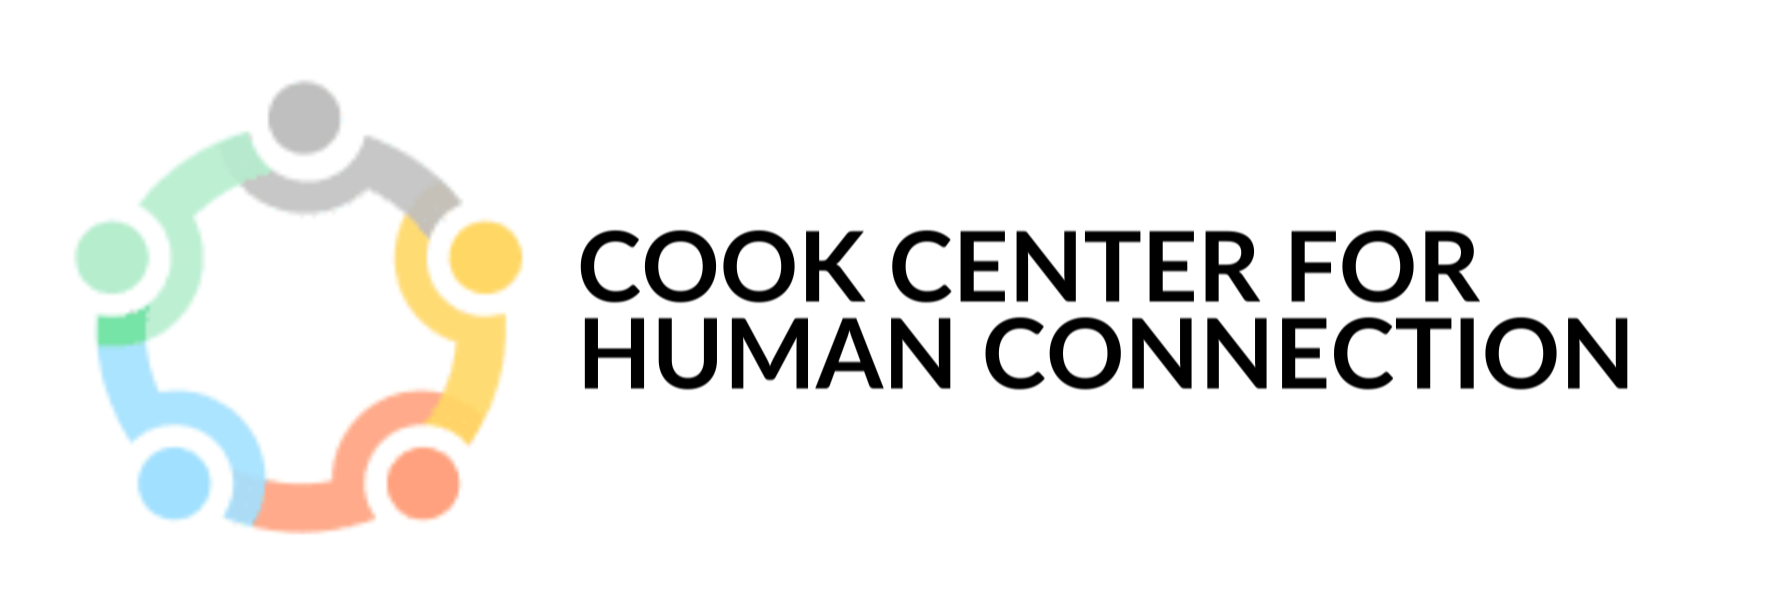 logo for the Cook Center for Human Connection